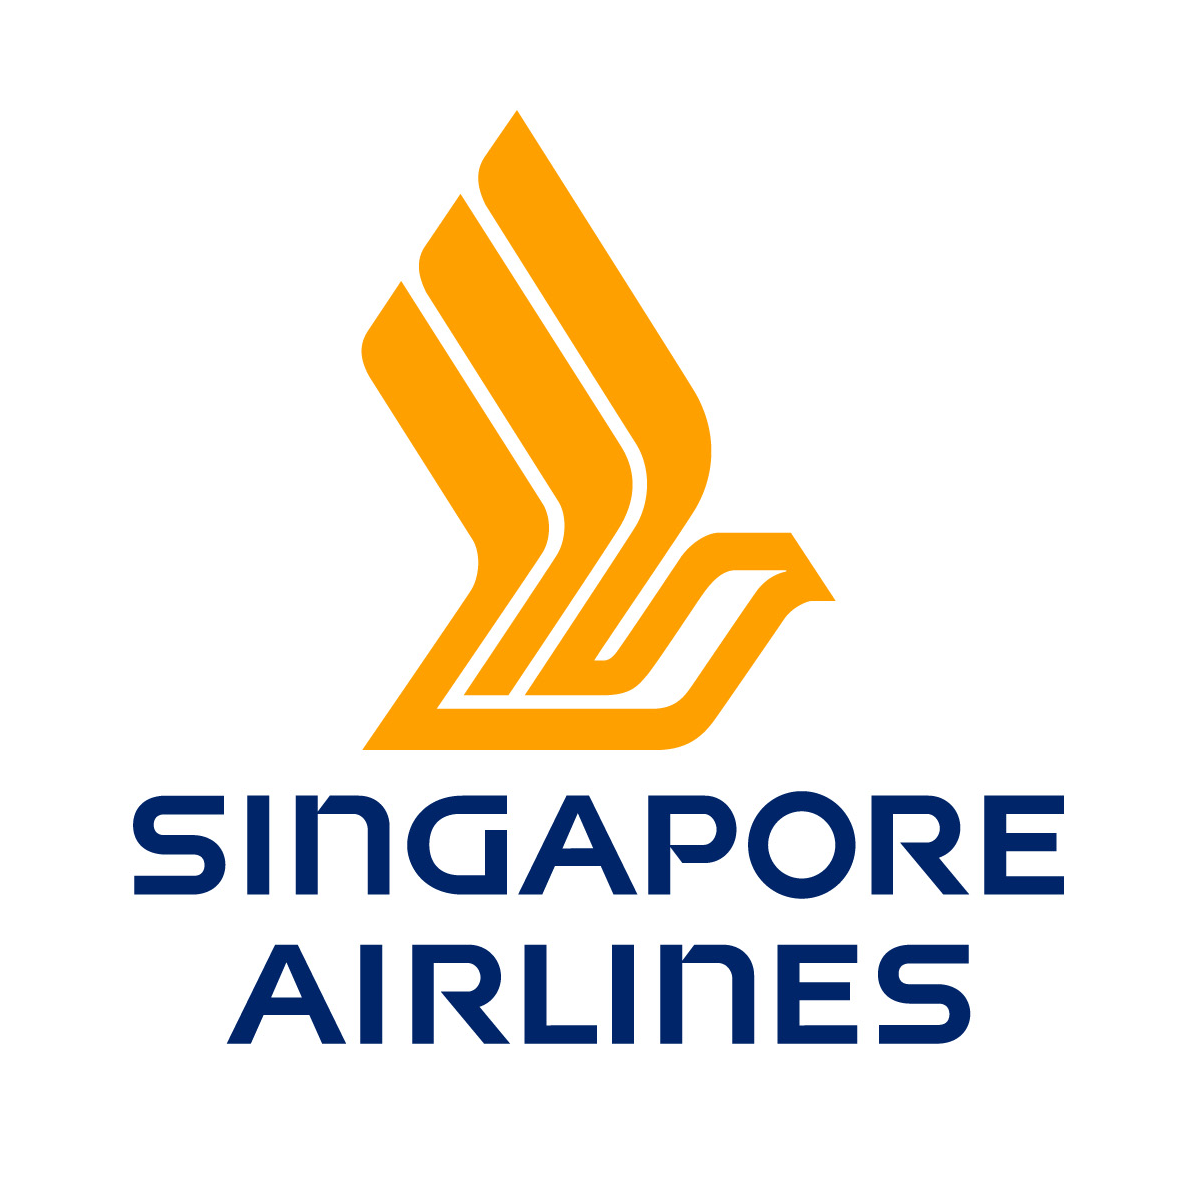 Singapore Airlines Logo   Singapore Airlines Vector Png - Singapore Airlines, Transparent background PNG HD thumbnail